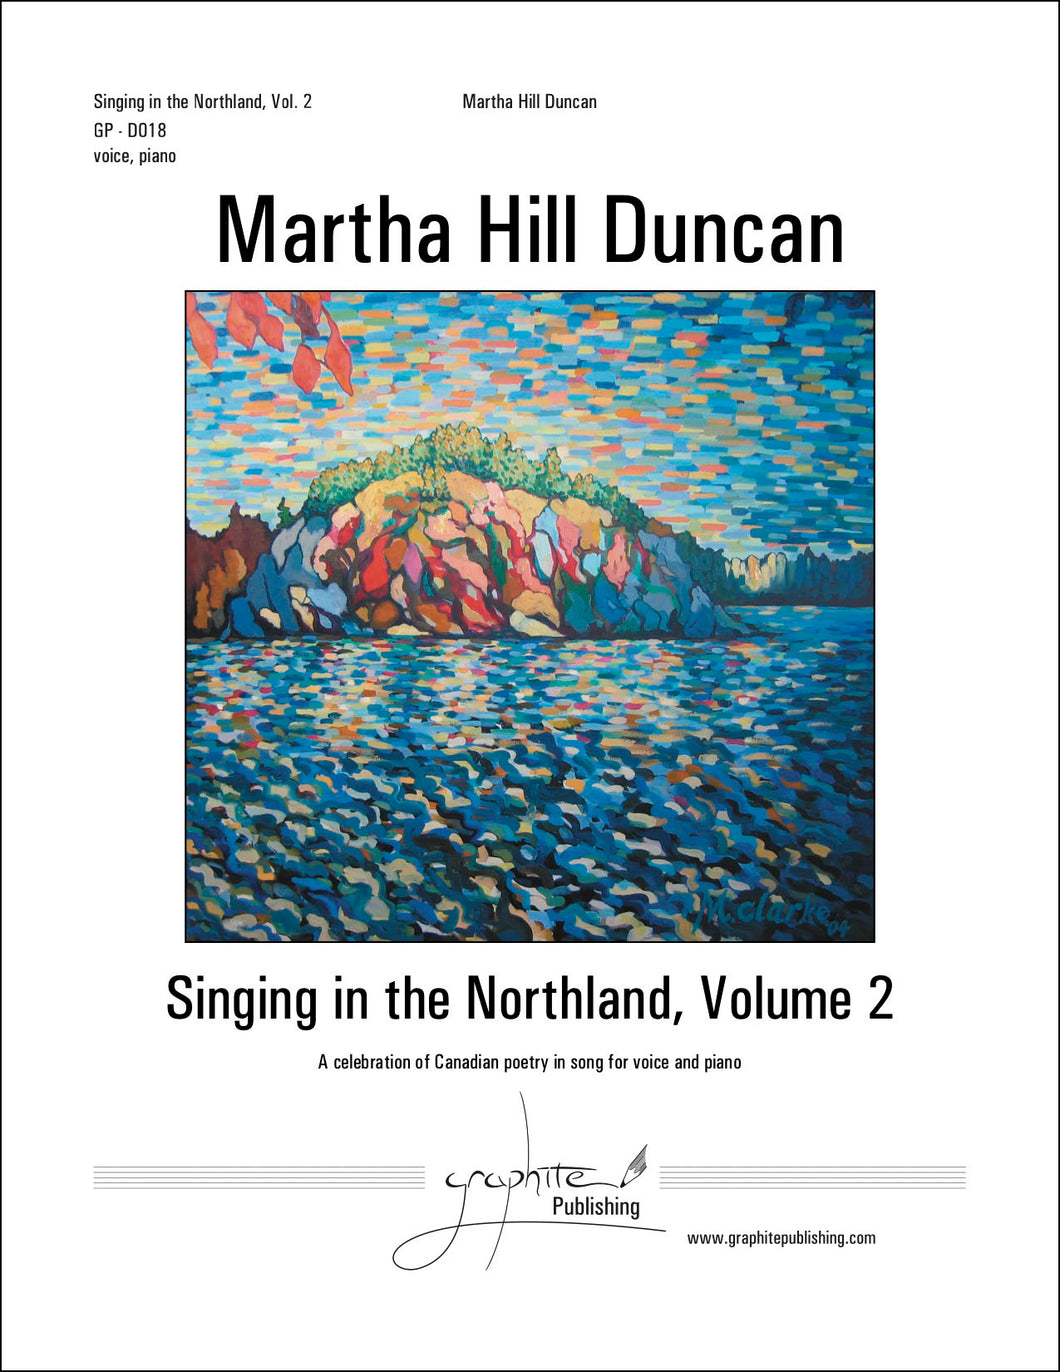 SEVERANCE - Medium/High Voice & Piano from SINGING IN THE NORTHLAND, VOL. 2